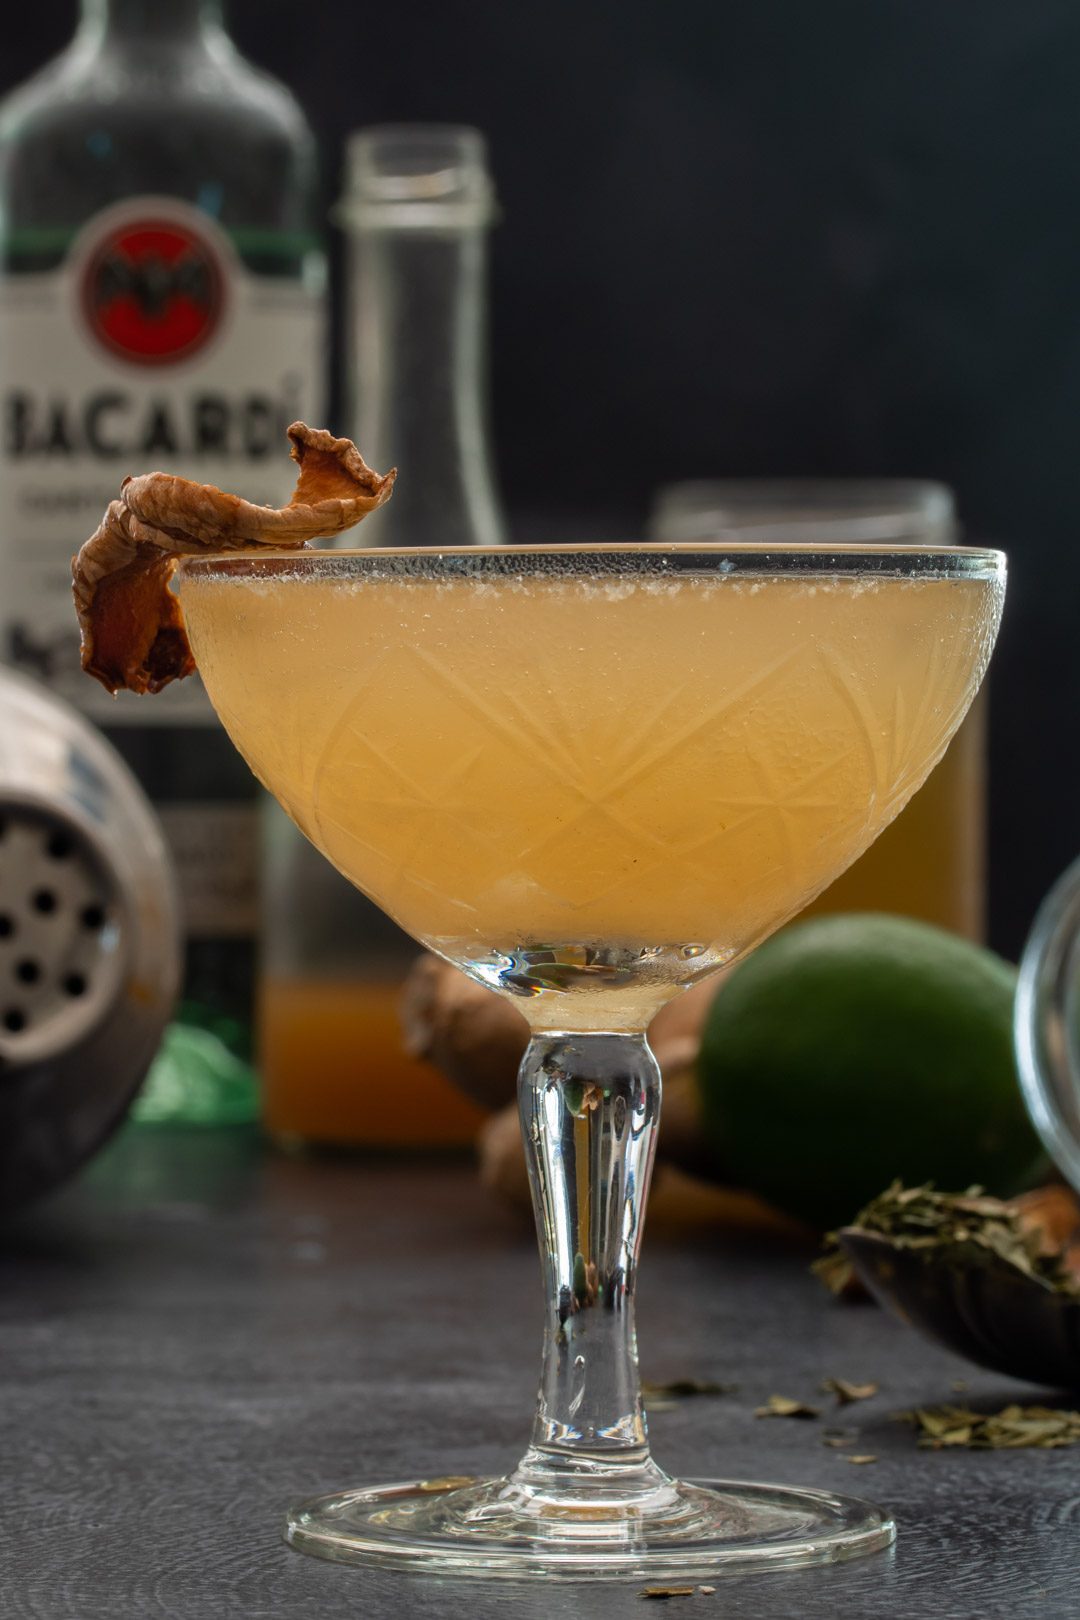 Ginger lime shrub daiquiri with cinnamon myrtle and ginger crisps: making